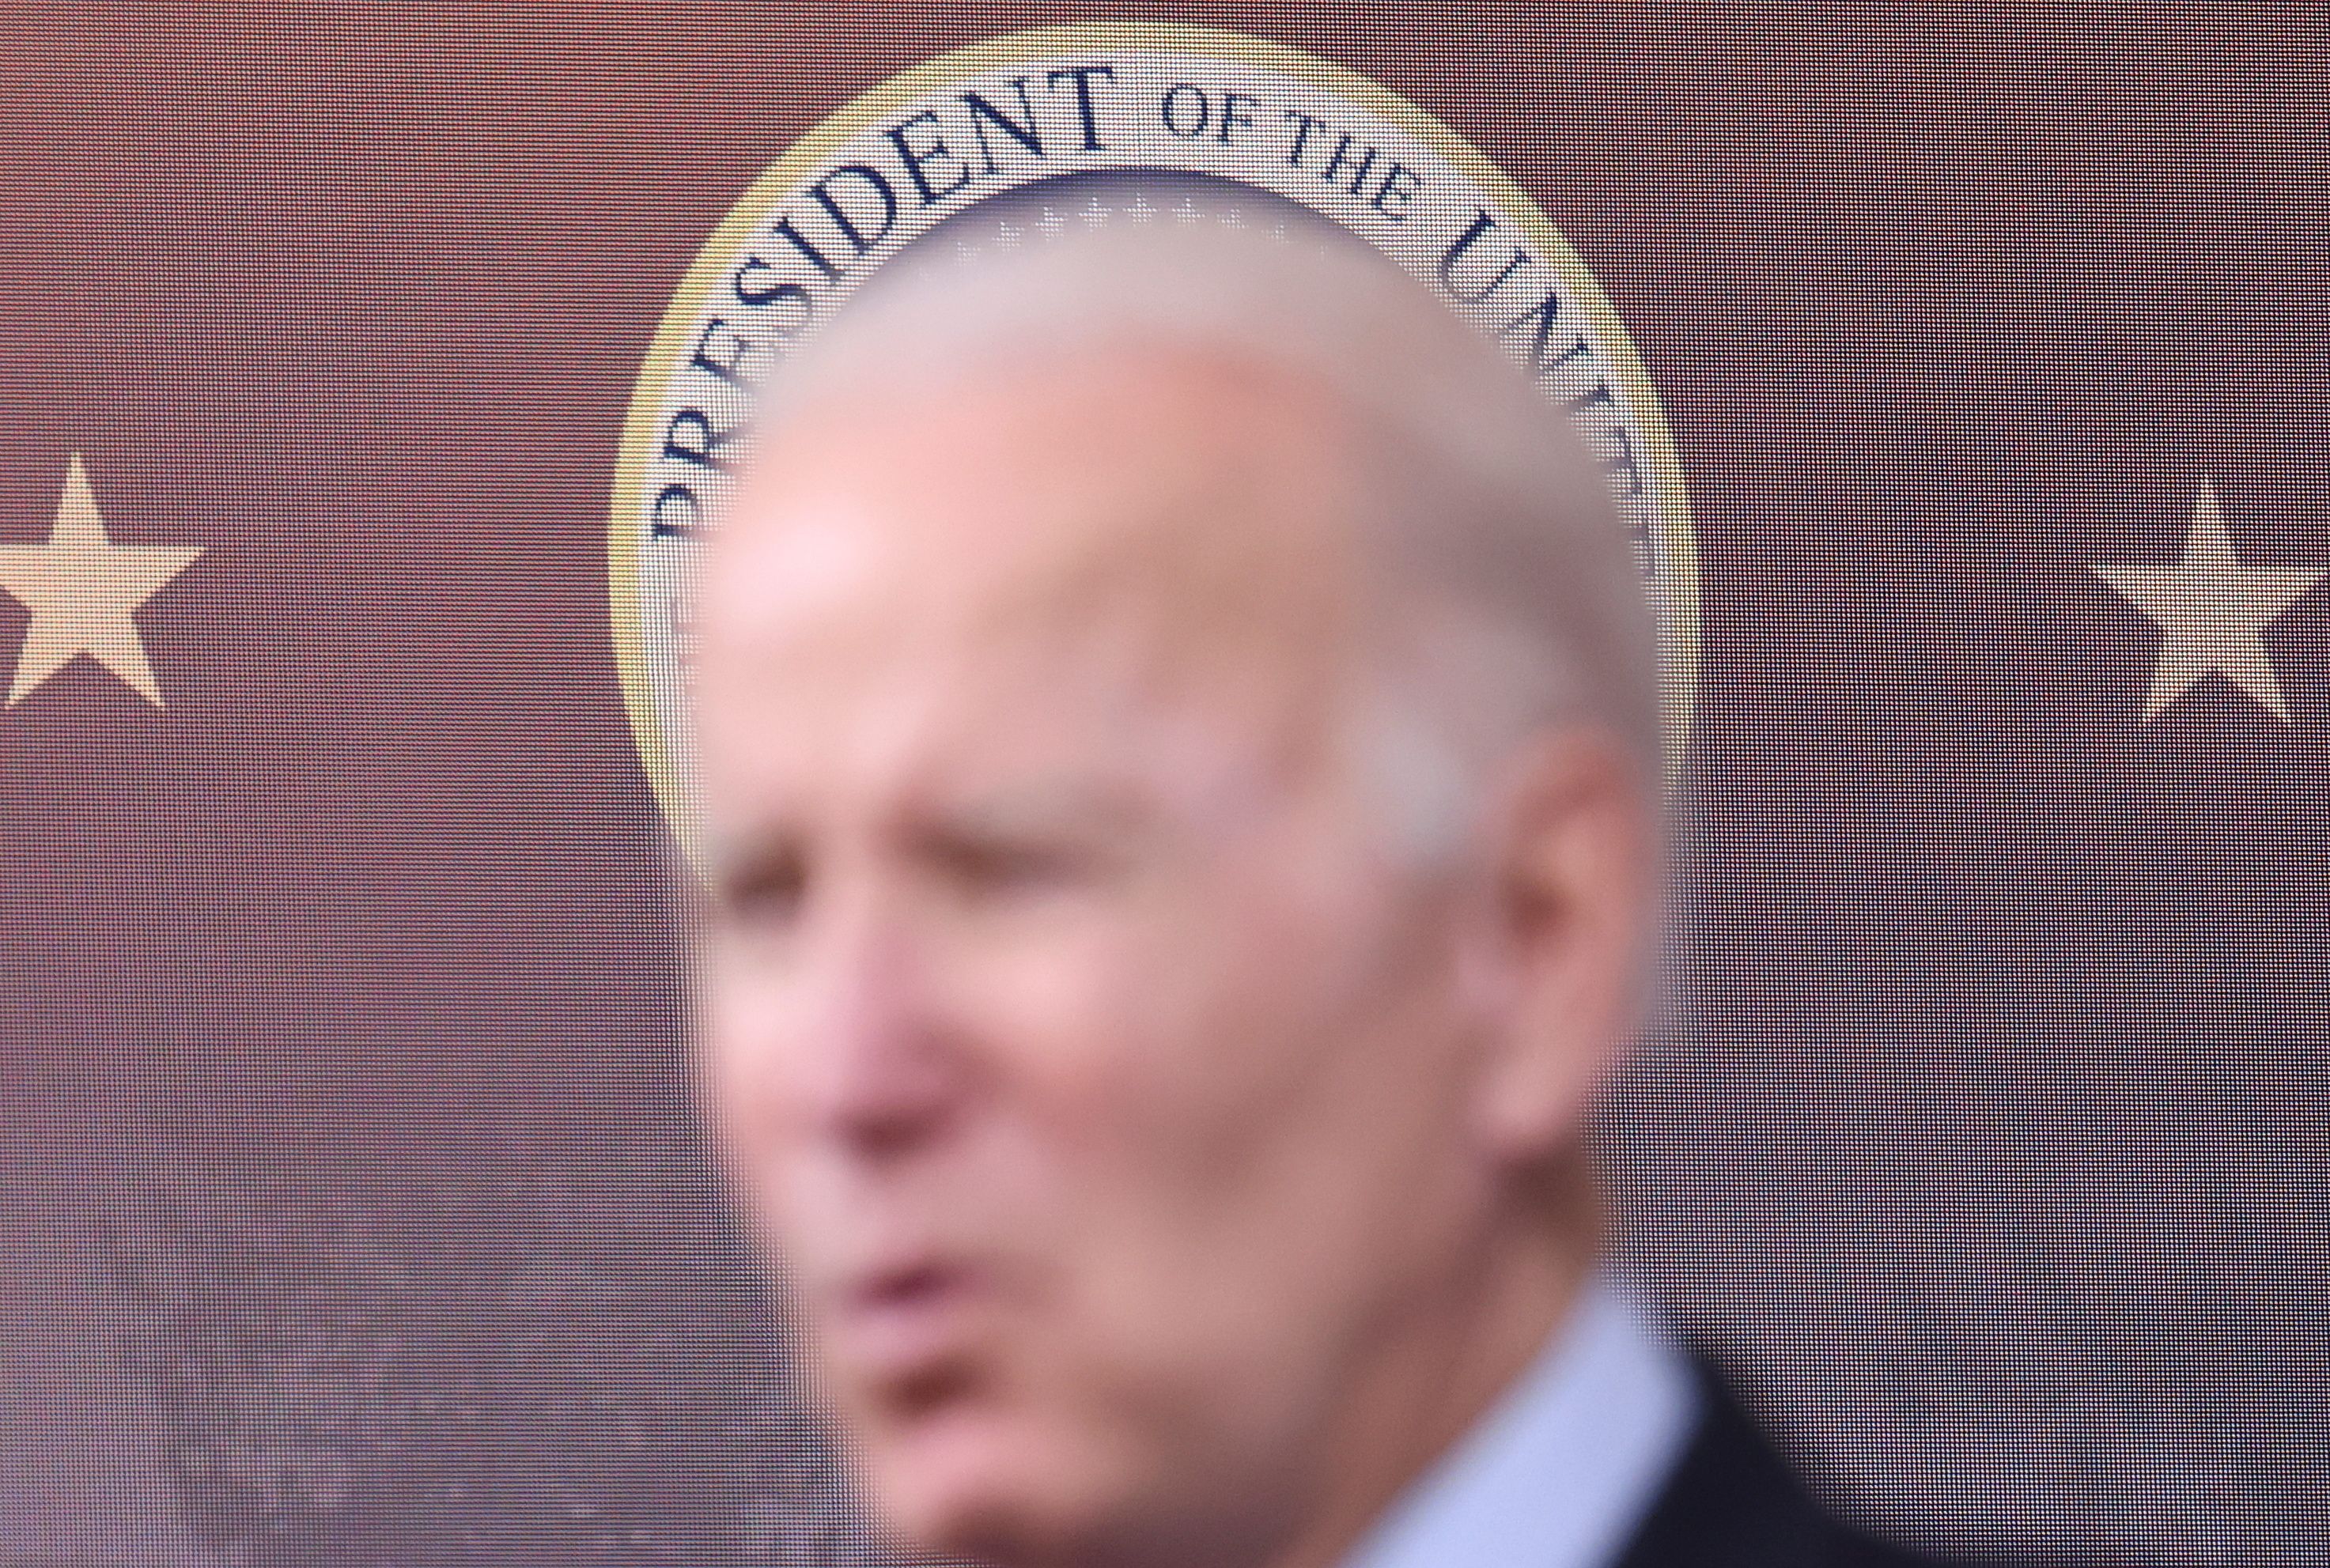 The presidential seal is seen as U.S. President Joe Biden delivers remarks on the economy and 